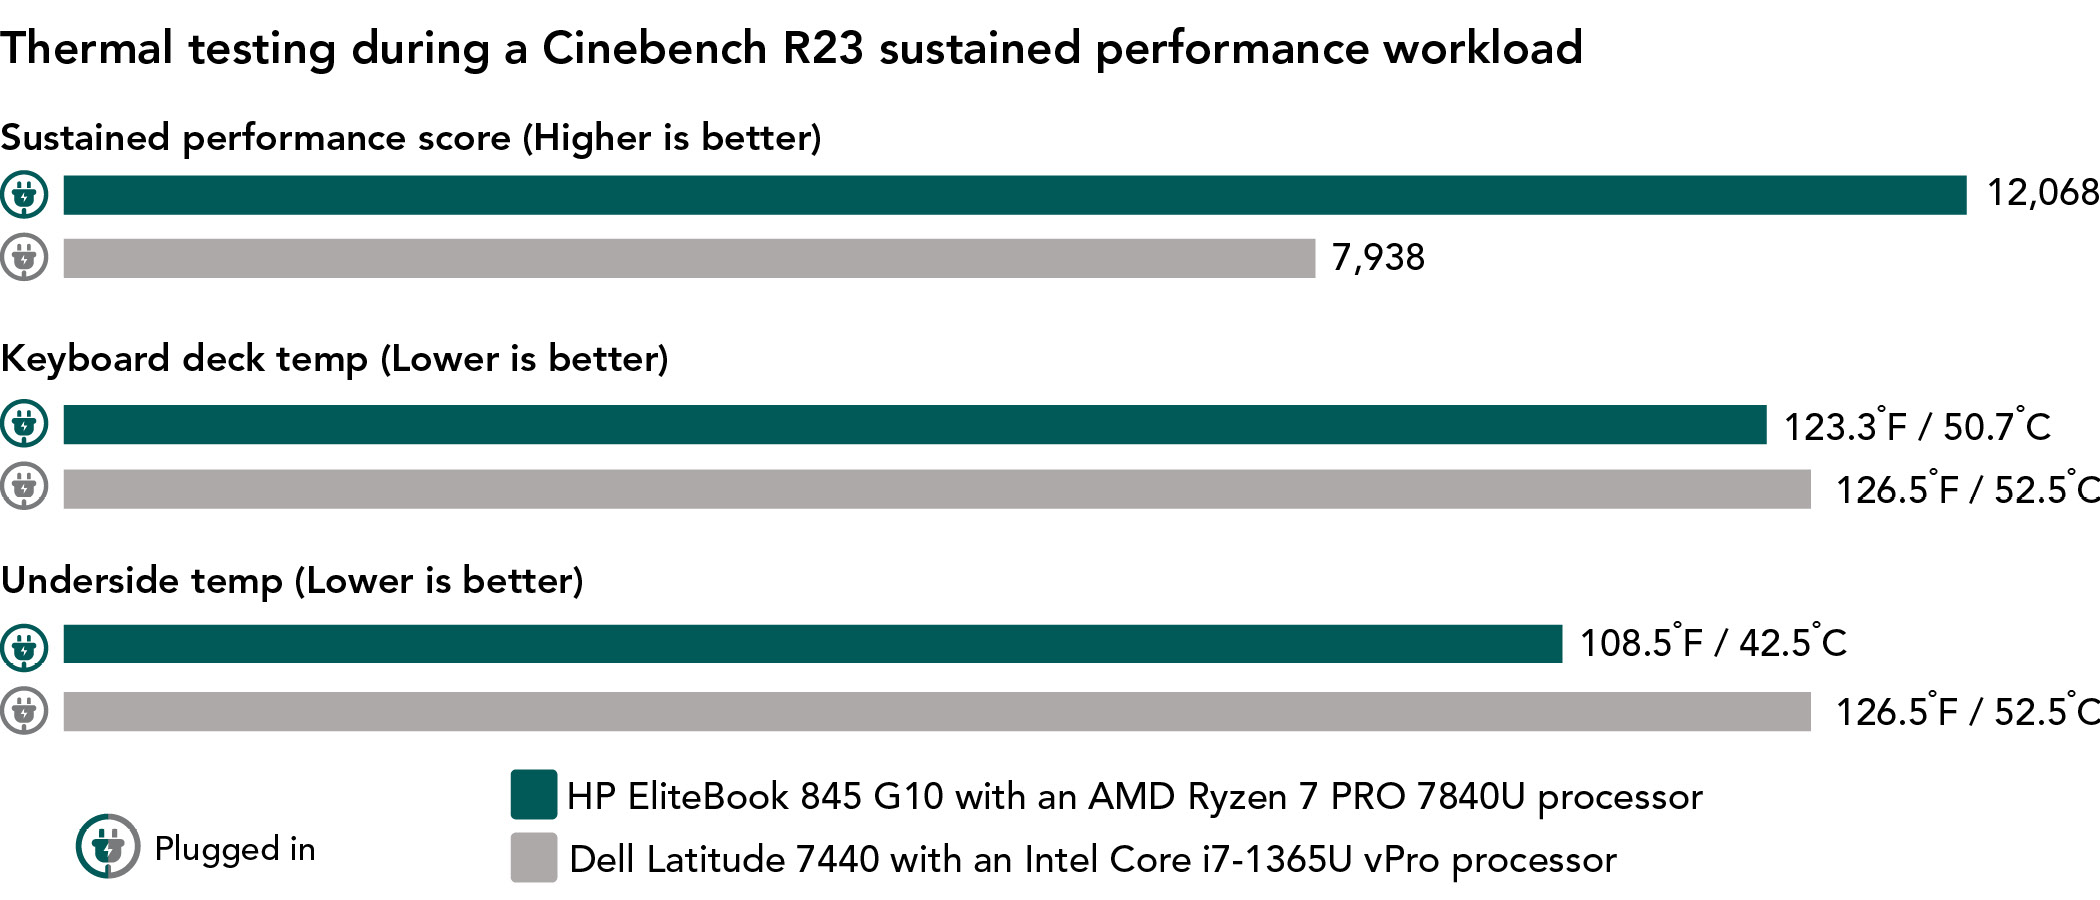 Chart showing thermal testing readings during a Cinebench R23 sustained performance workload. For sustained performance scores, where higher is better, HP EliteBook 845 G10 shows a 12,068 score and the Dell Latitude 7440 shows 7,938. For keyboard deck temp, where lower is better, HP EliteBook 845 G10 shows 123.3 degrees Fahrenheit or 50.7 degrees Celsius and the Dell Latitude 7440 shows 126.5 degrees Fahrenheit or 52.5 degrees Celsius. For underside temp, where lower is better, HP EliteBook 845 G10 shows 108.5 degrees Fahrenheit or 42.5 degrees Celsius and the Dell Latitude 7440 shows 126.5 degrees Fahrenheit or 52.5 degrees Celsius.